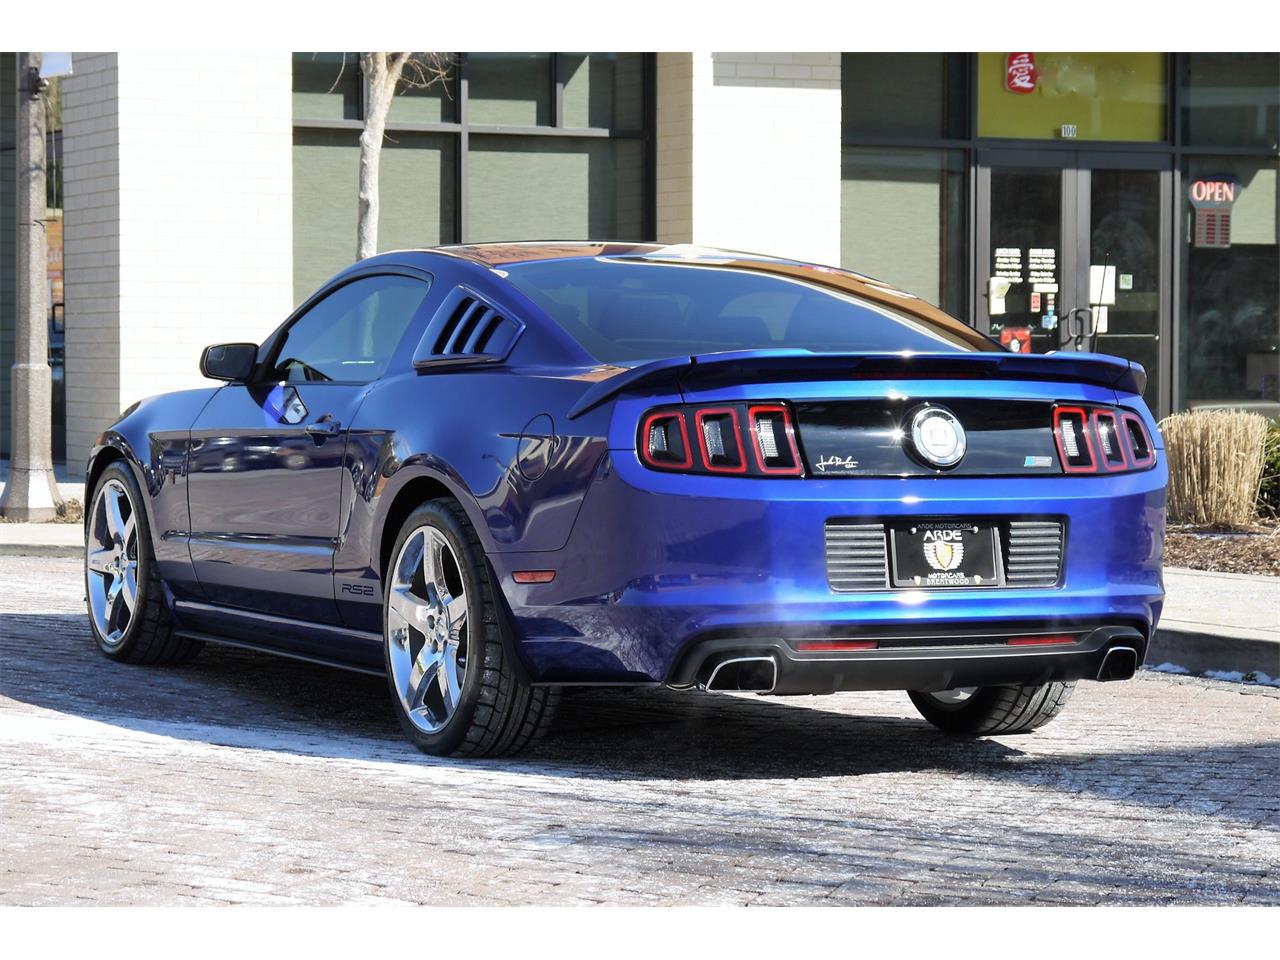 2014 Ford Mustang (Roush) for Sale CC